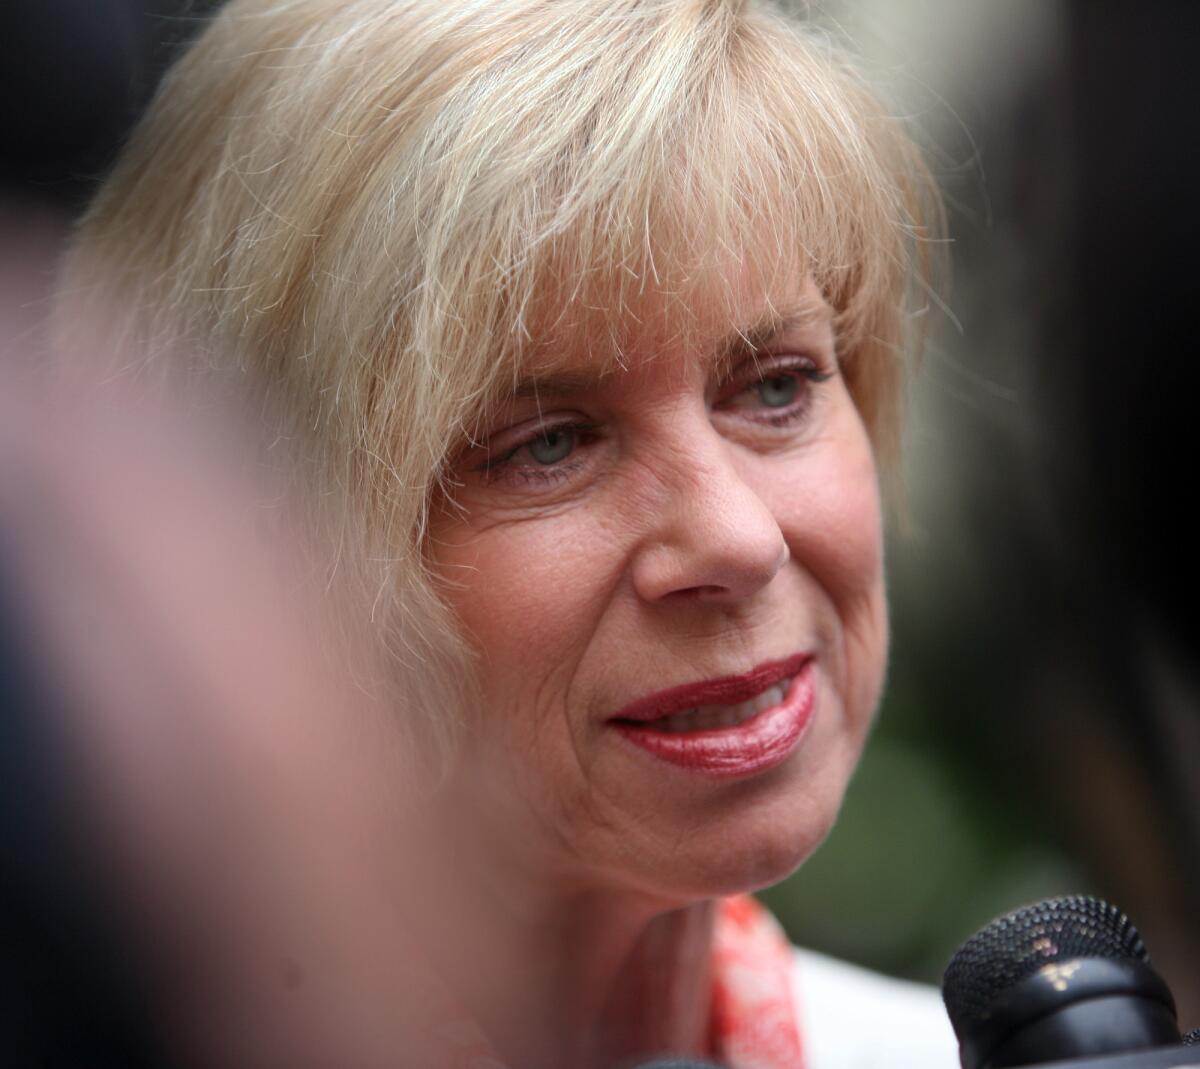 The criticism over a website set up by Republican lawmakers in California about Obamacare has now gone national, and on Tuesday Democratic Rep. Janice Hahn (D-San Pedro) jumped into the fray, calling for the site to be taken down.